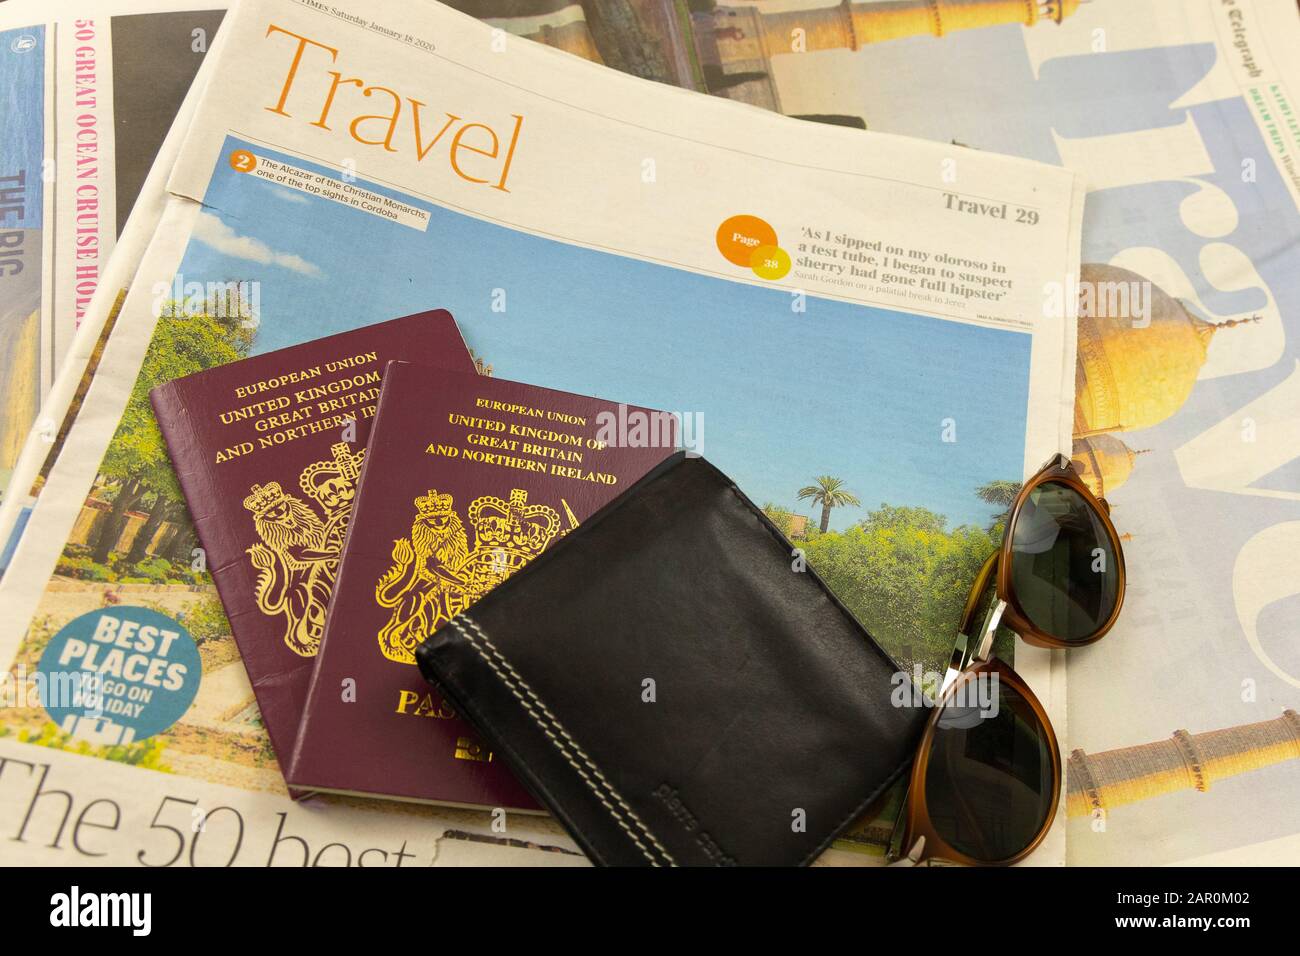 Travel pages of broadsheet papers from the UK Stock Photo